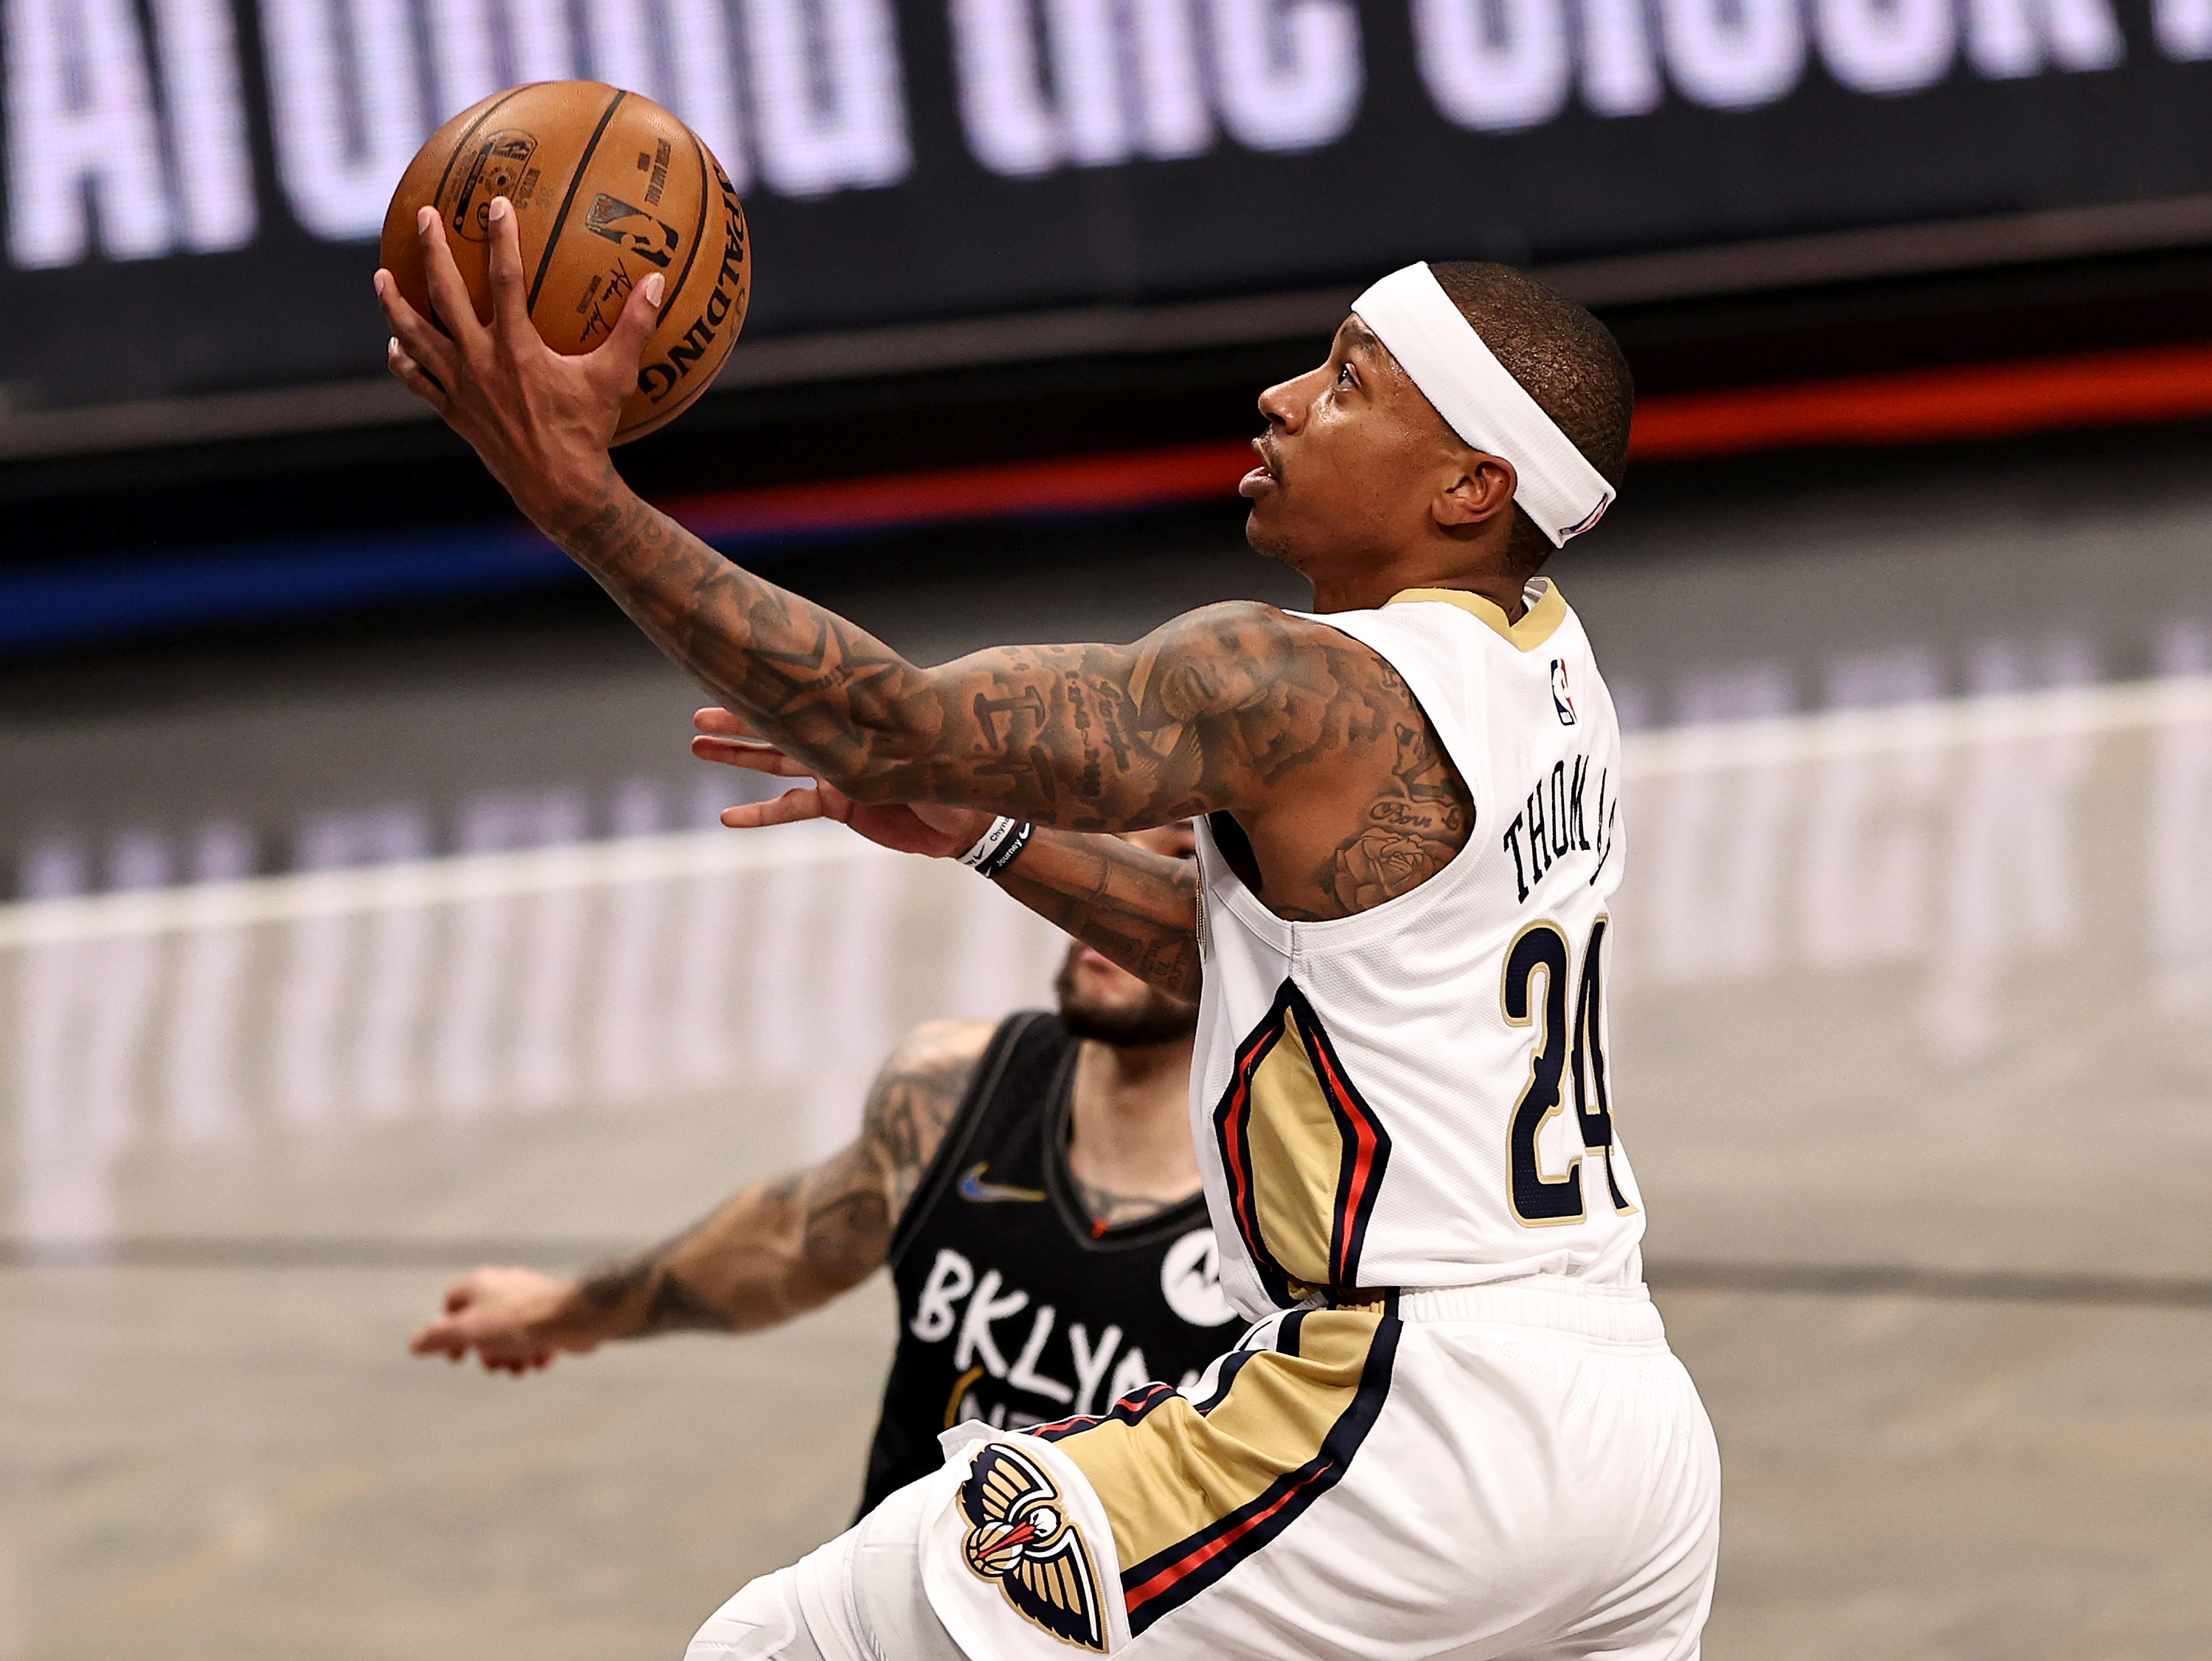 Current NBA free agent Isaiah Thomas drives to the basket during a game with the New Orleans Pelicans in April